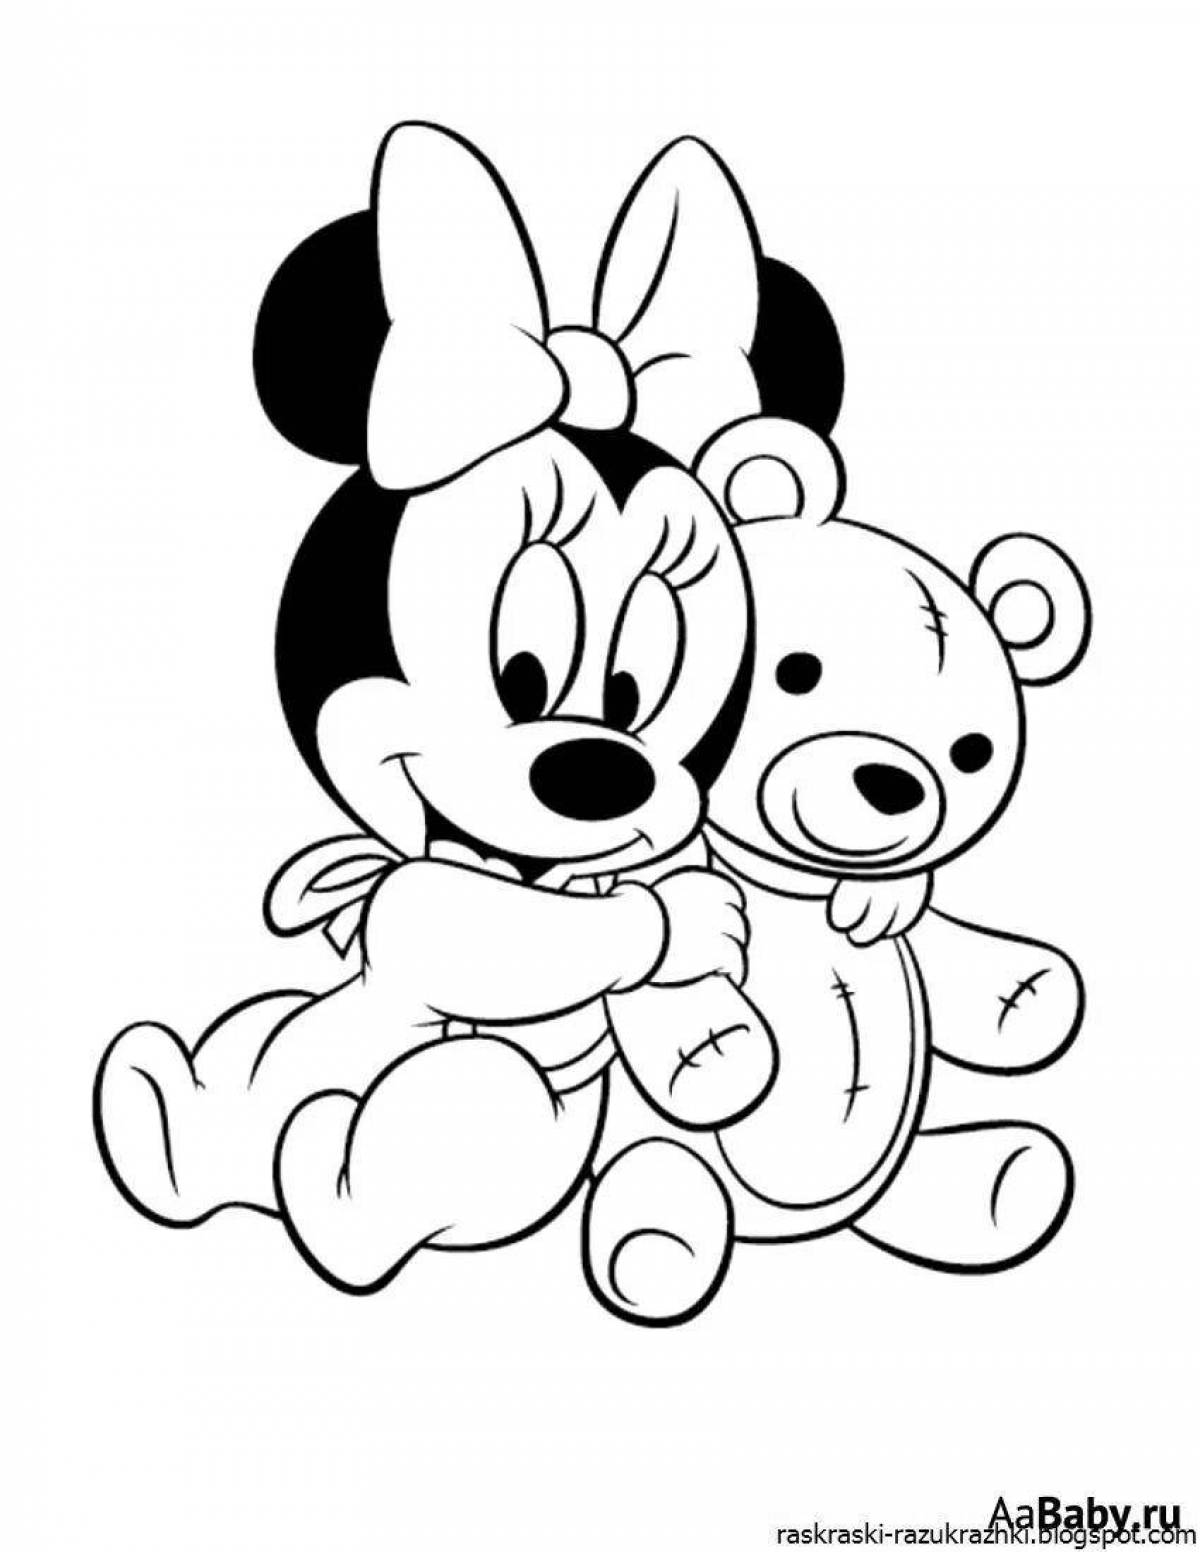 Minnie mouse coloring while playing